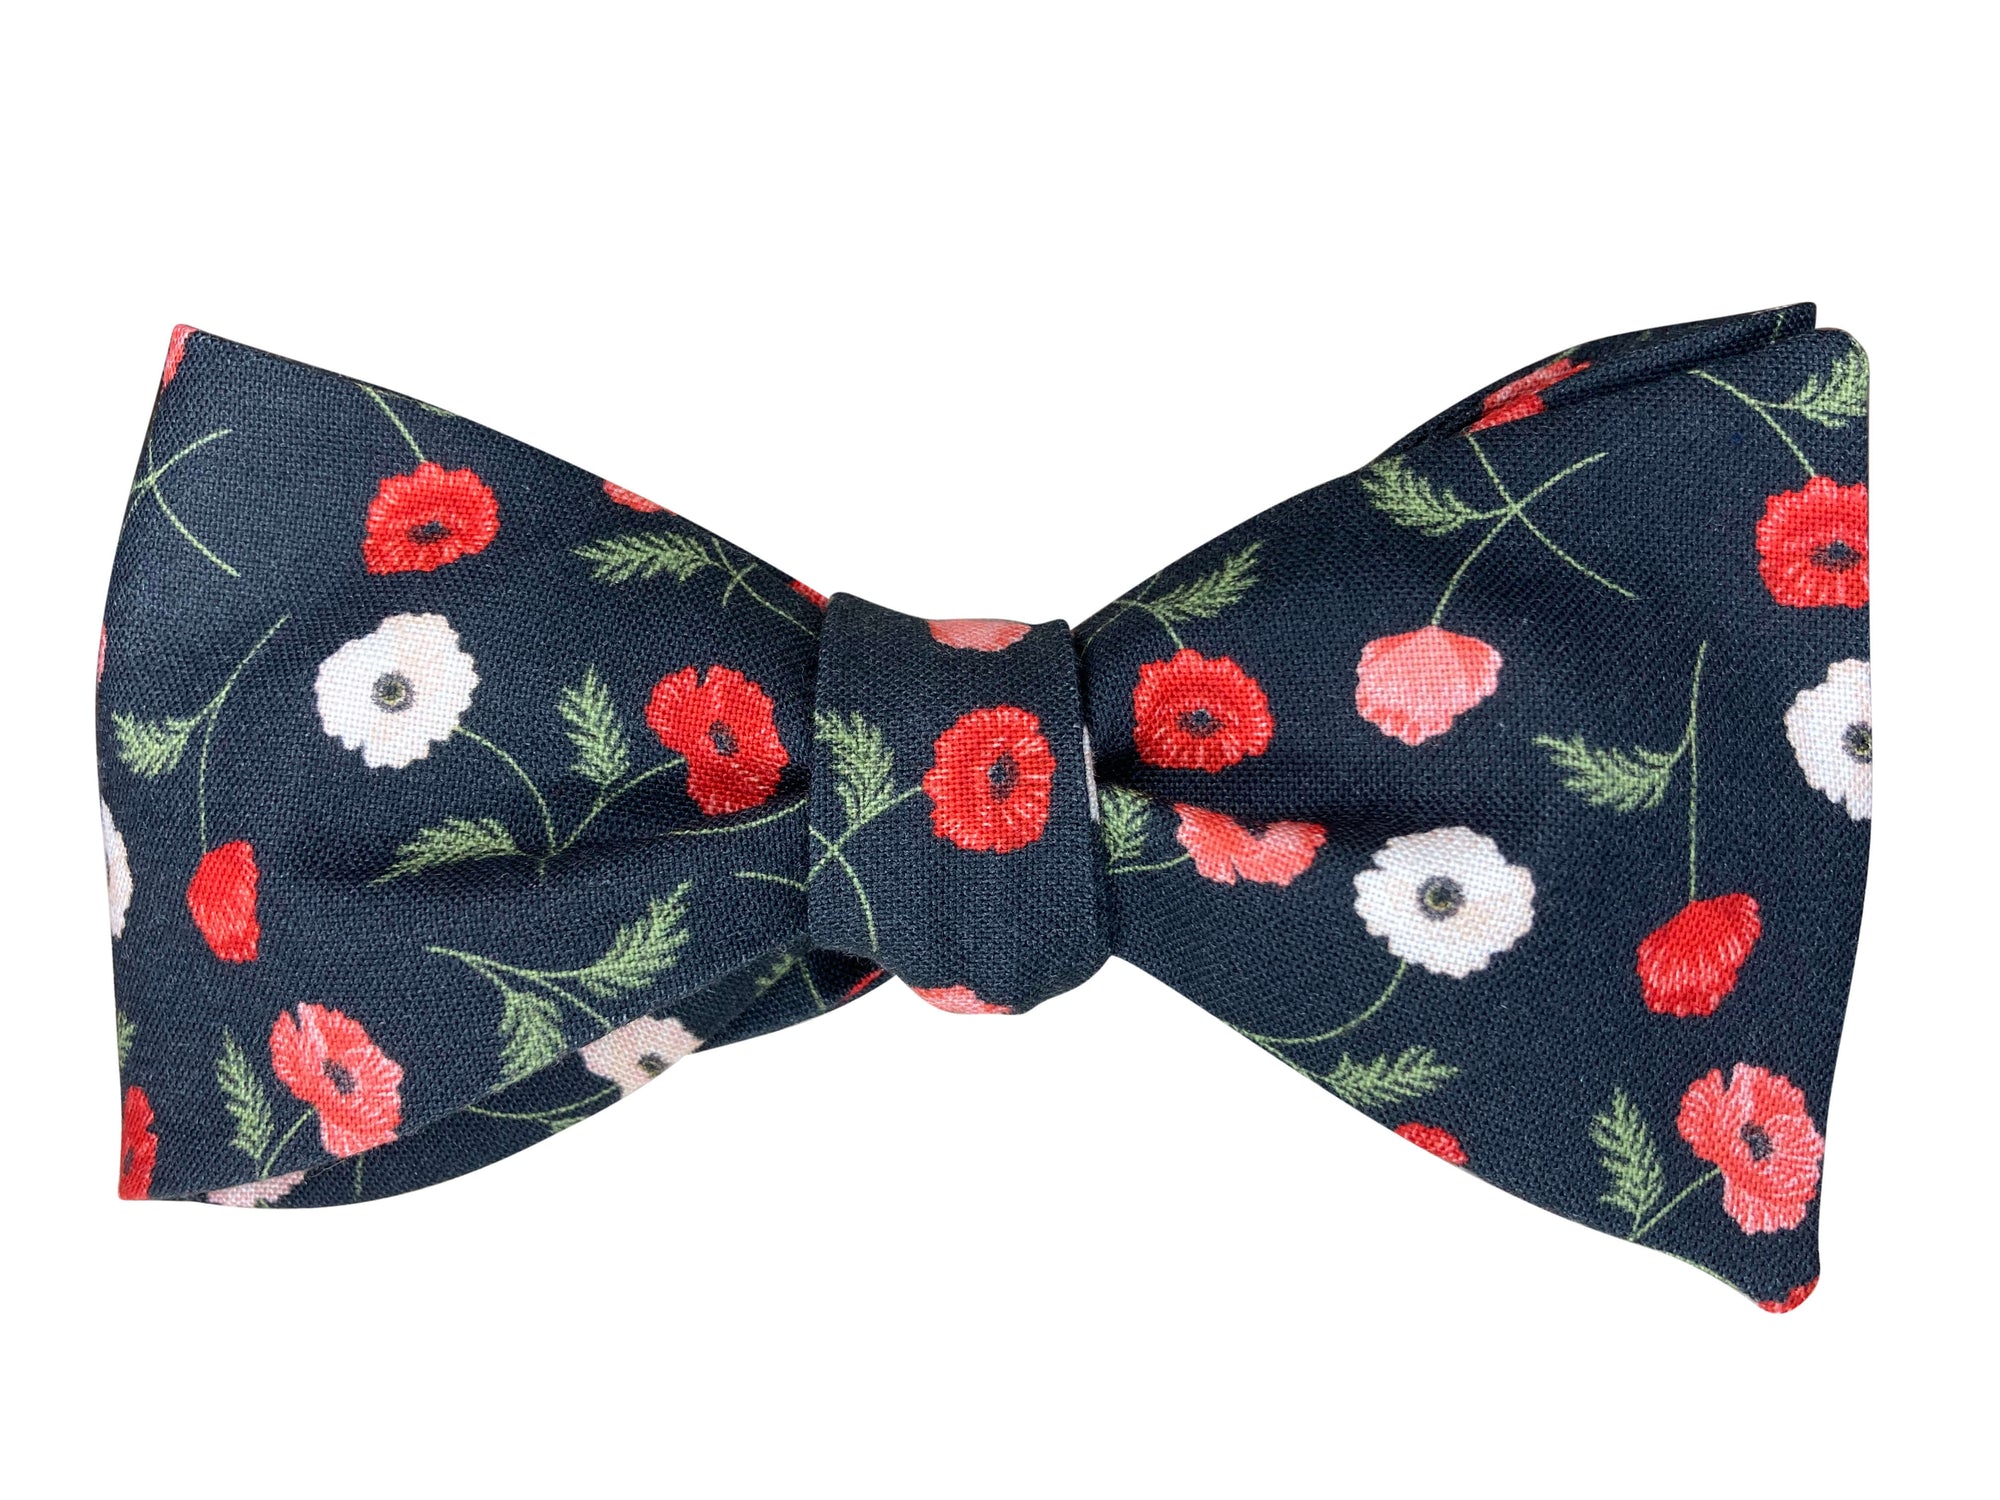 Falling poppies remembrance self tie bow tie